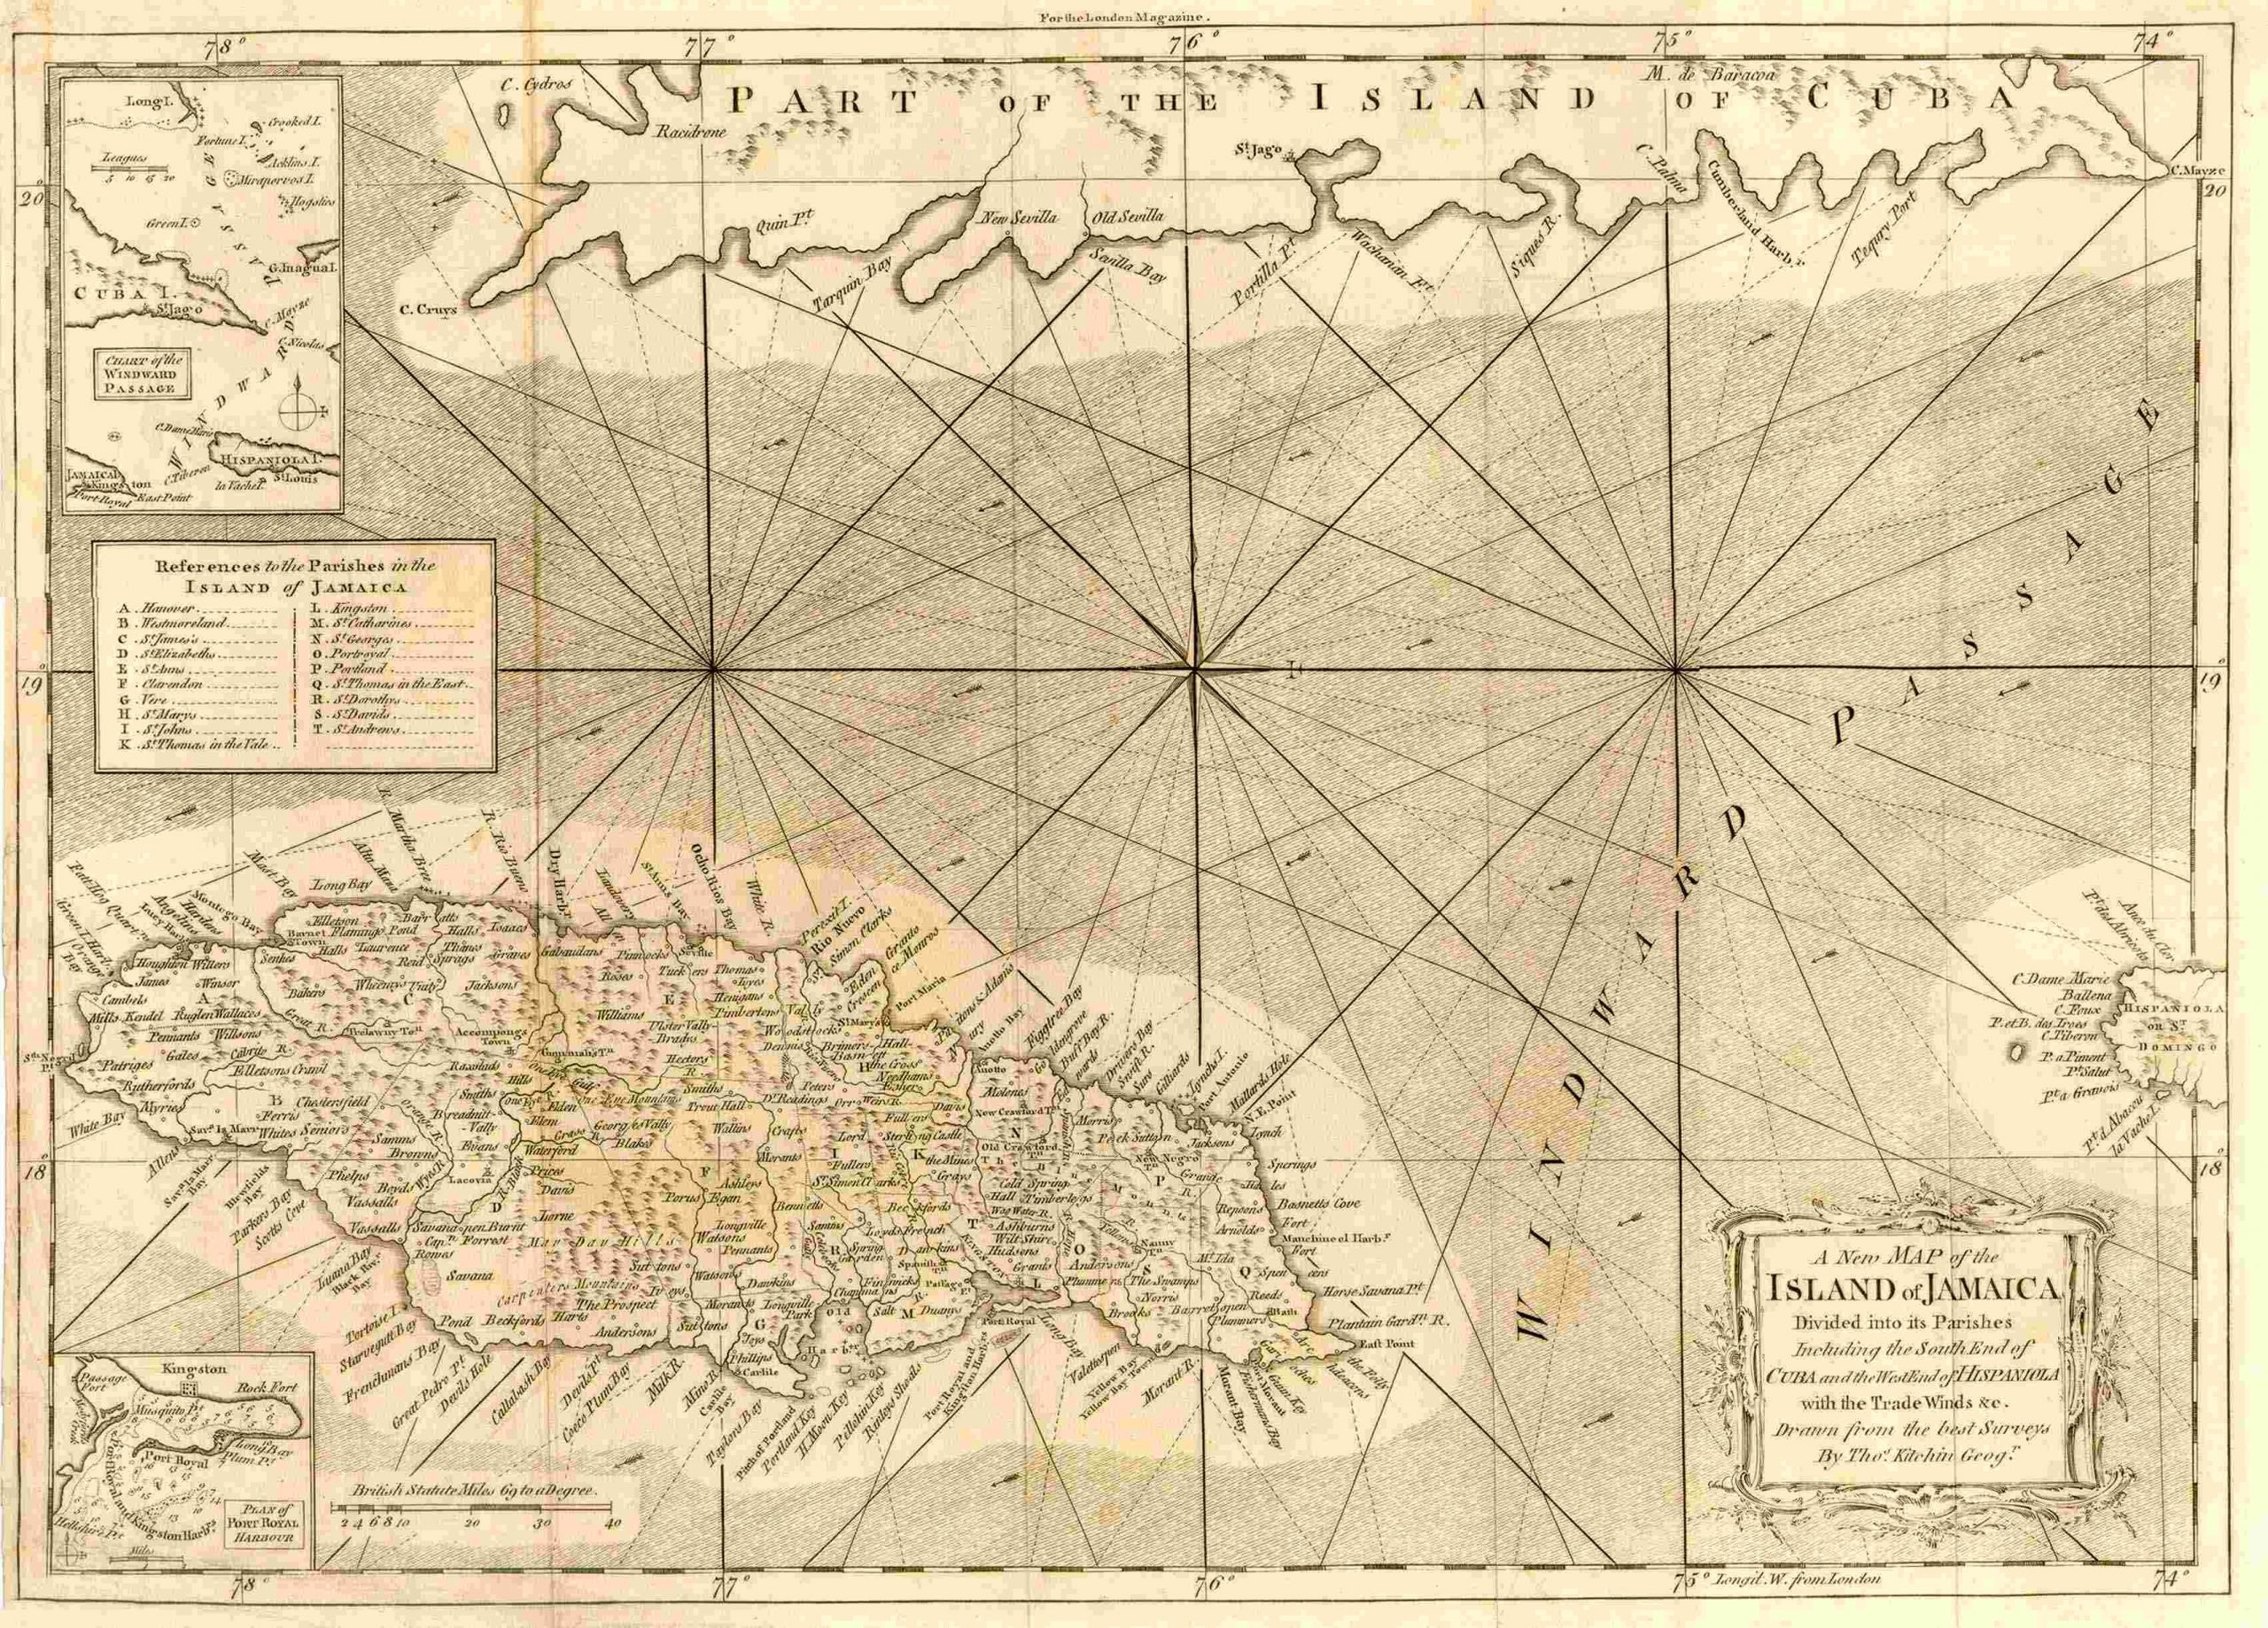 Kitchen's New Map of Jamaica 1765